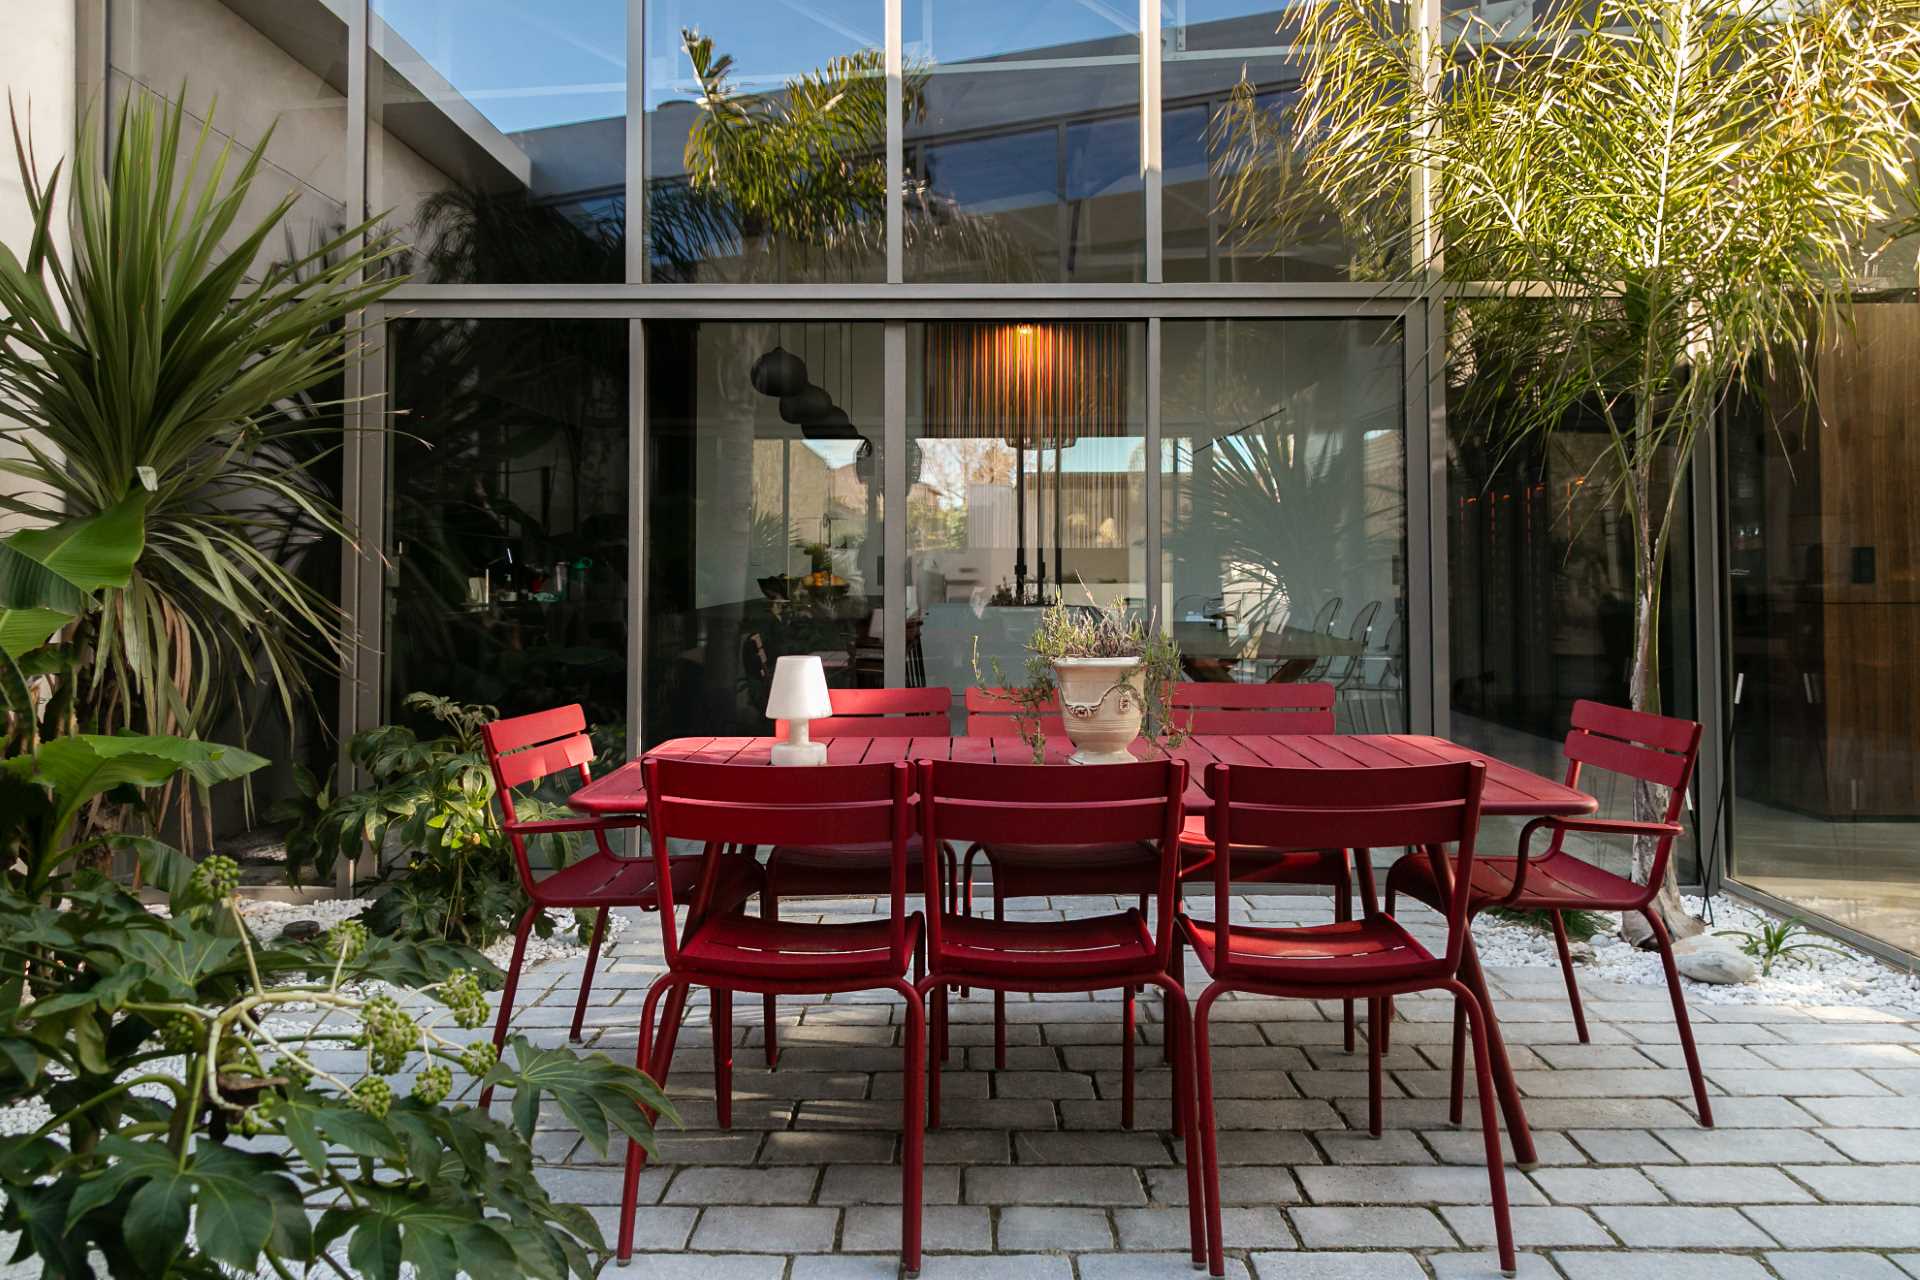 A modern patio furnished with red outdoor furniture.